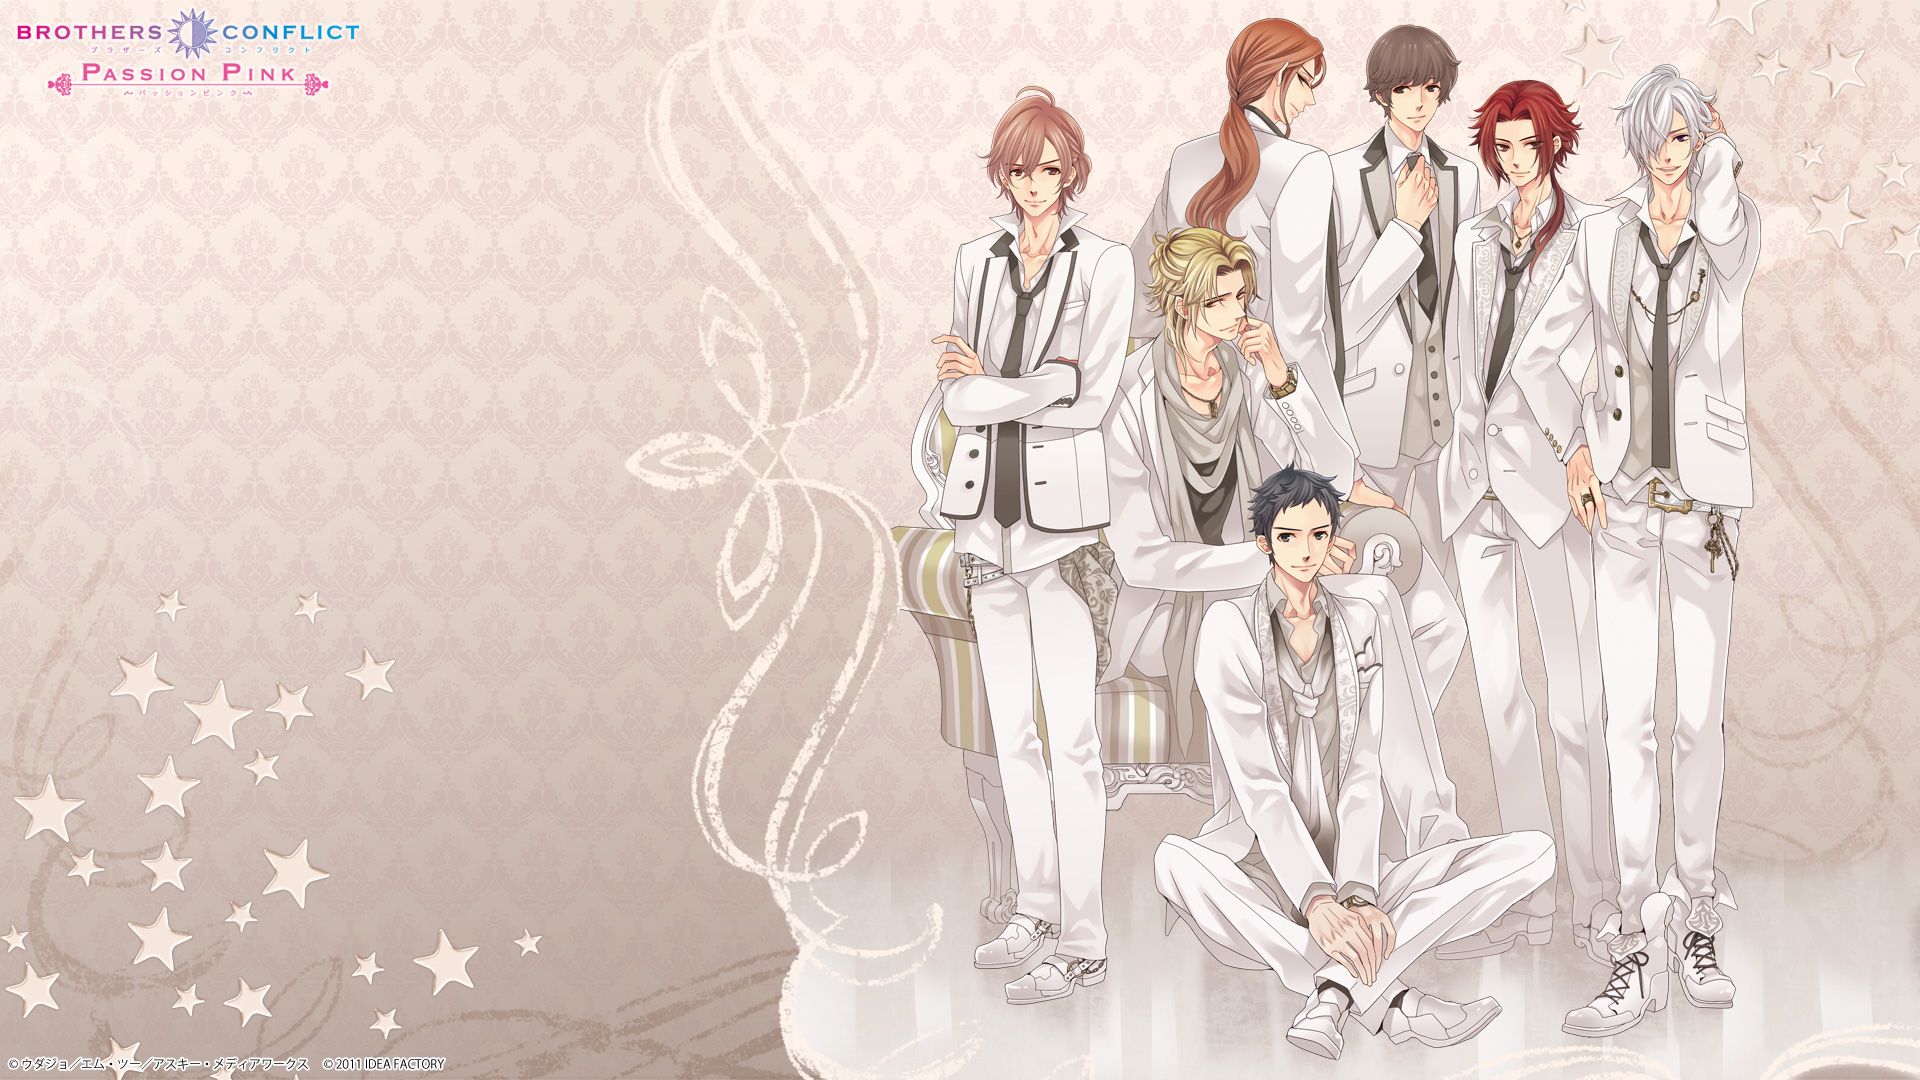 BROTHERS CONFLICT HD Wallpaper Anime Image Board